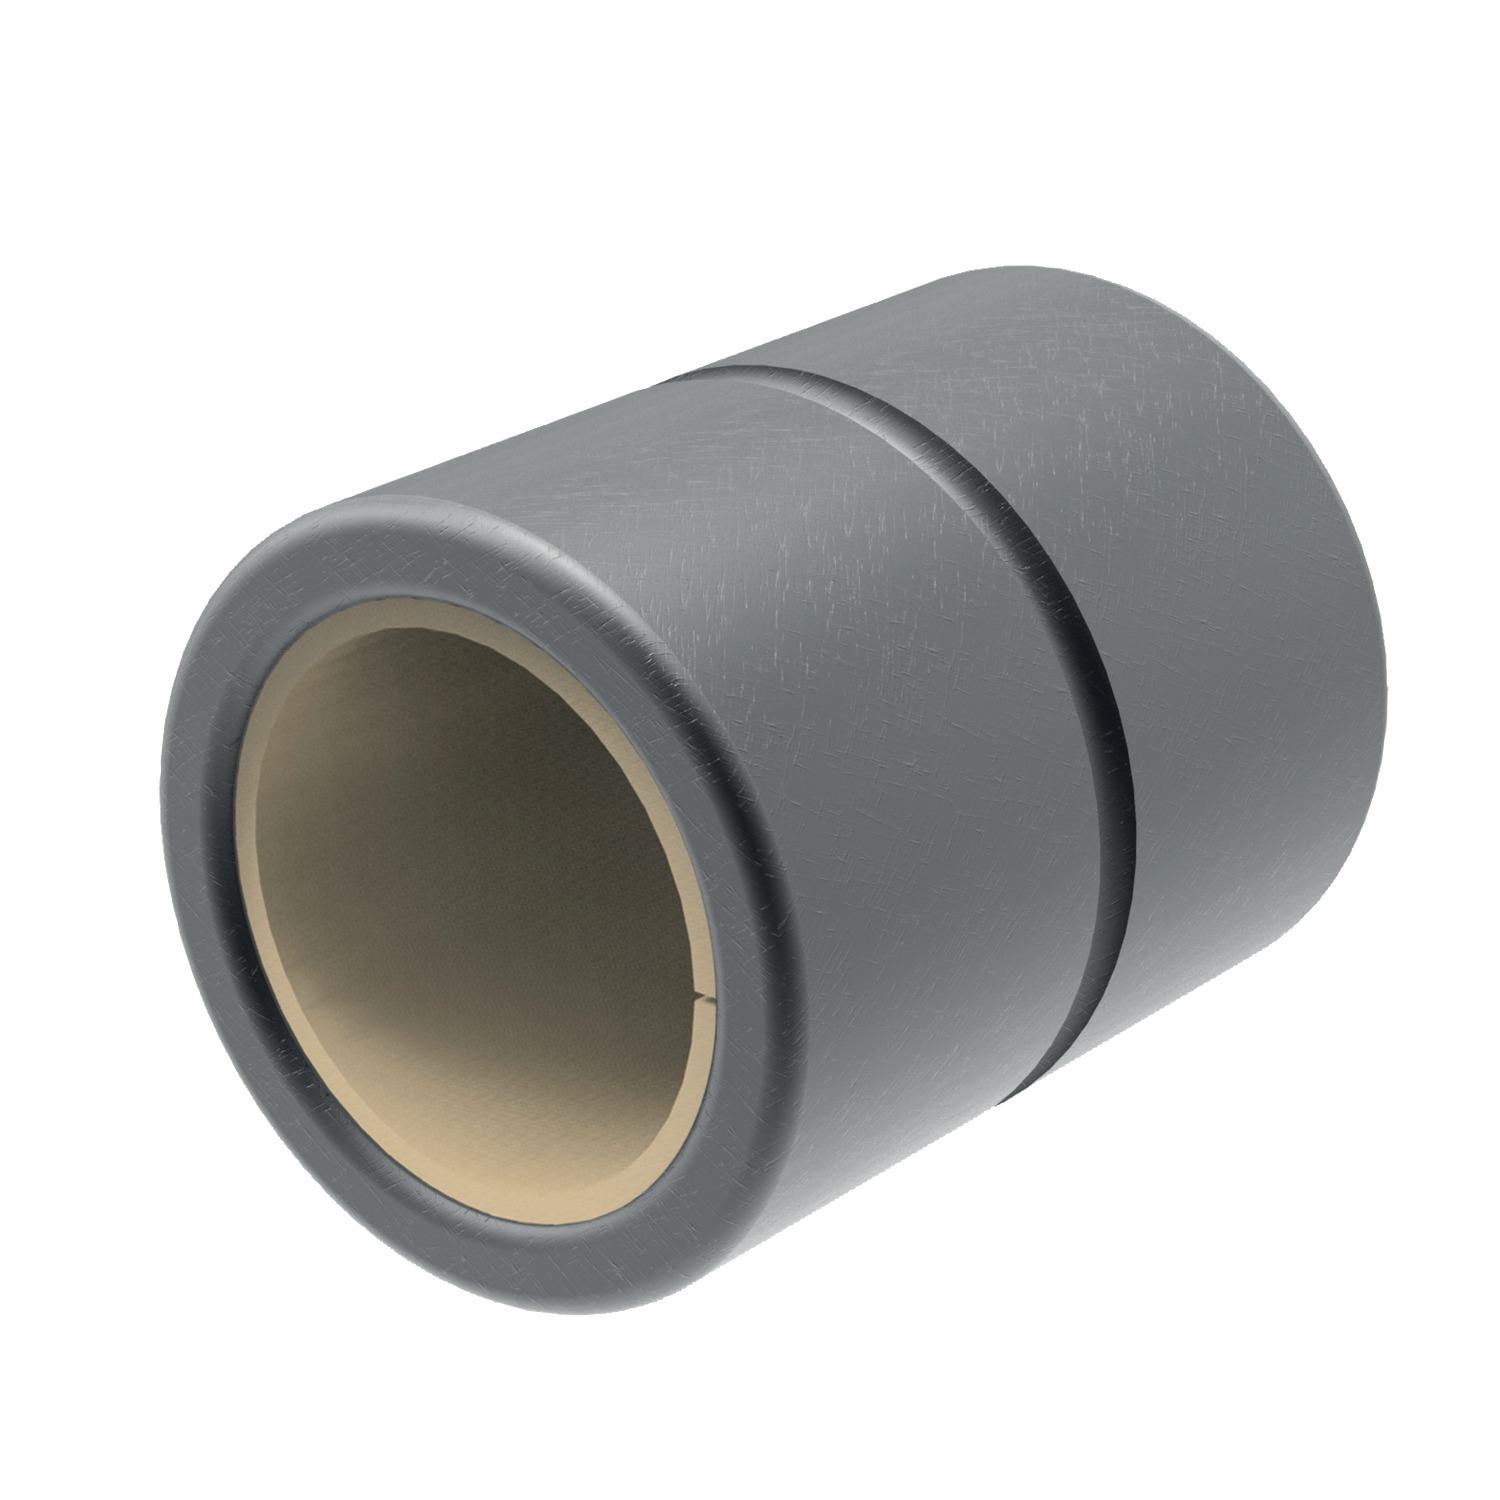 Thin Wall Ceramic Linear Bearings Ceramic bearings are ideal for use on all shaft bar materials.